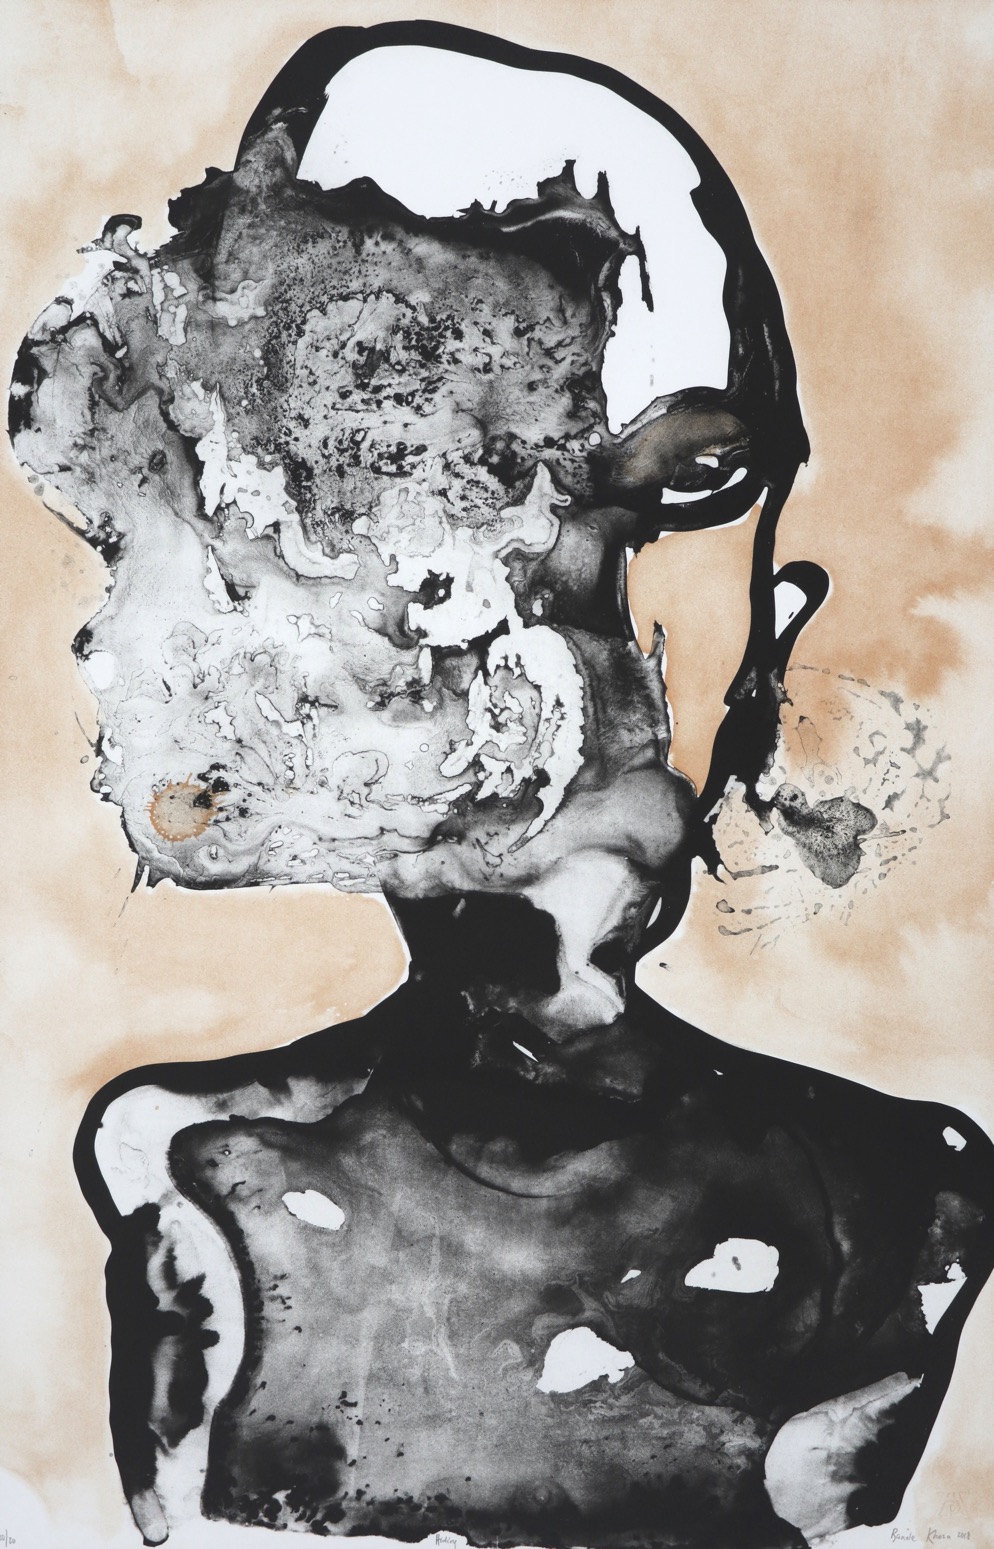 Limited edition lithograph by Banele Khoza of a person's head and torso looking forward with the right-hand side of face obscured by loose brushwork in ink.